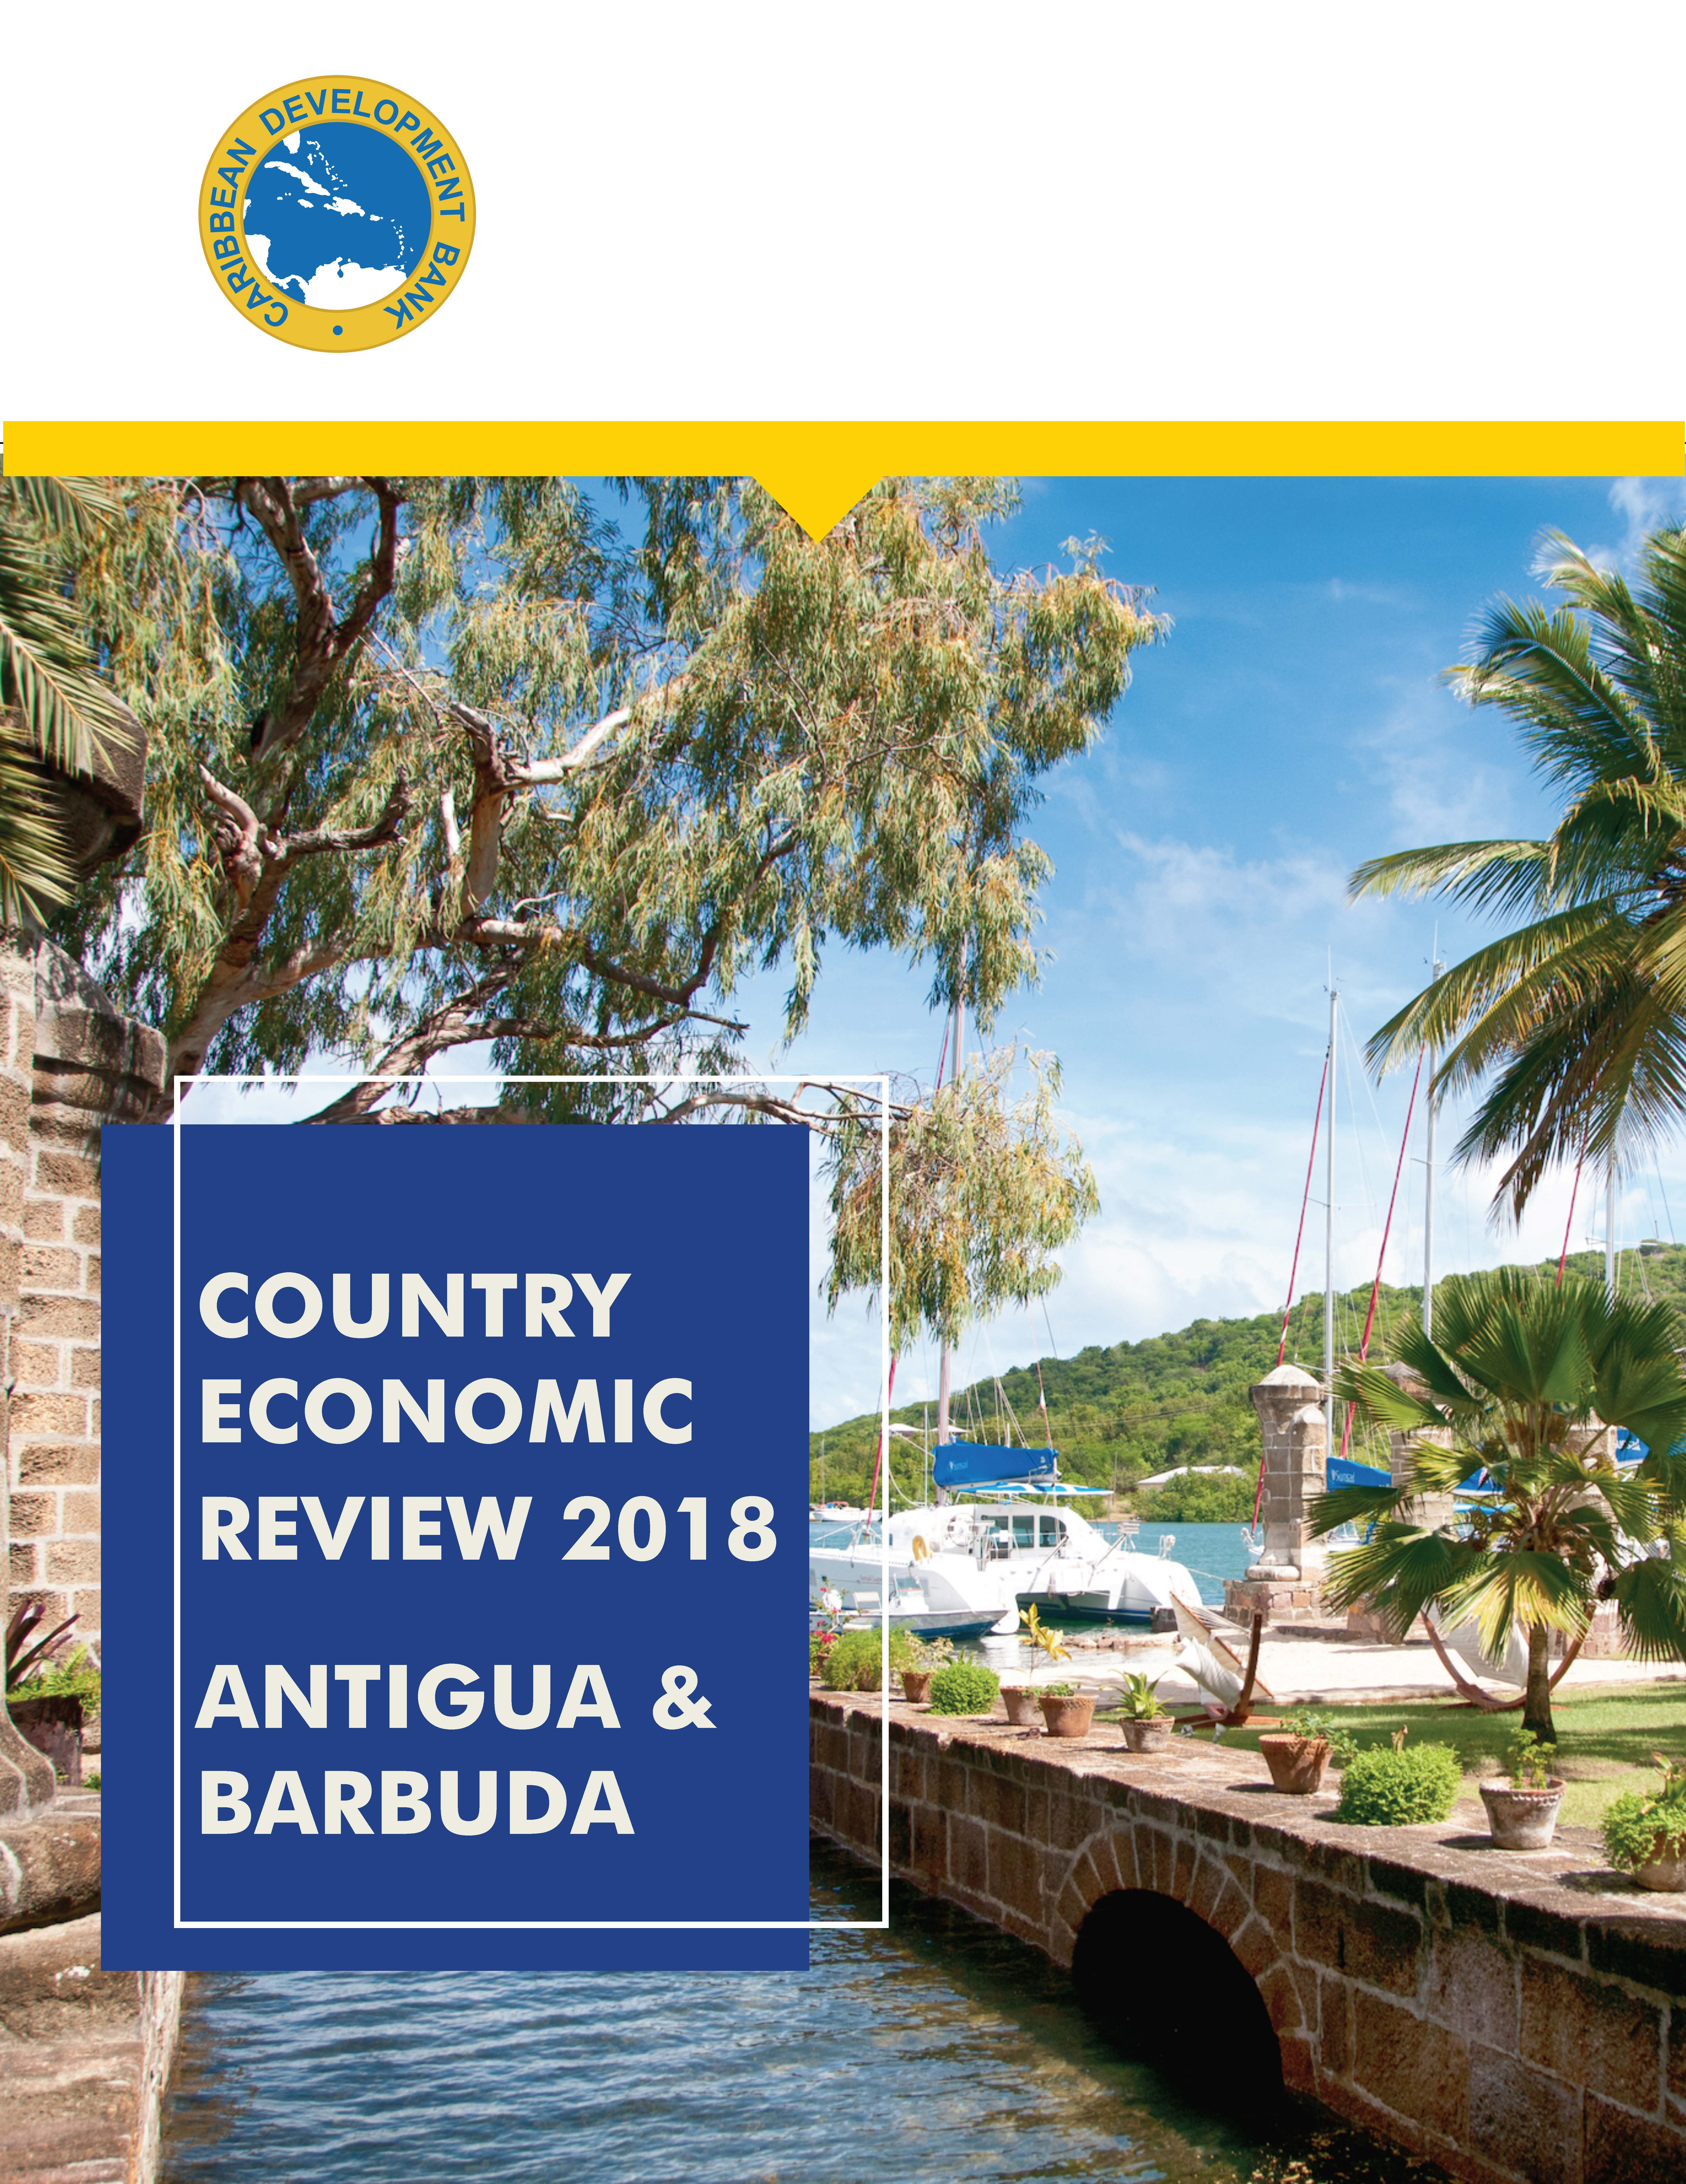 Country Economic Review 2018 - Antigua and Barbuda title with view of shoreline